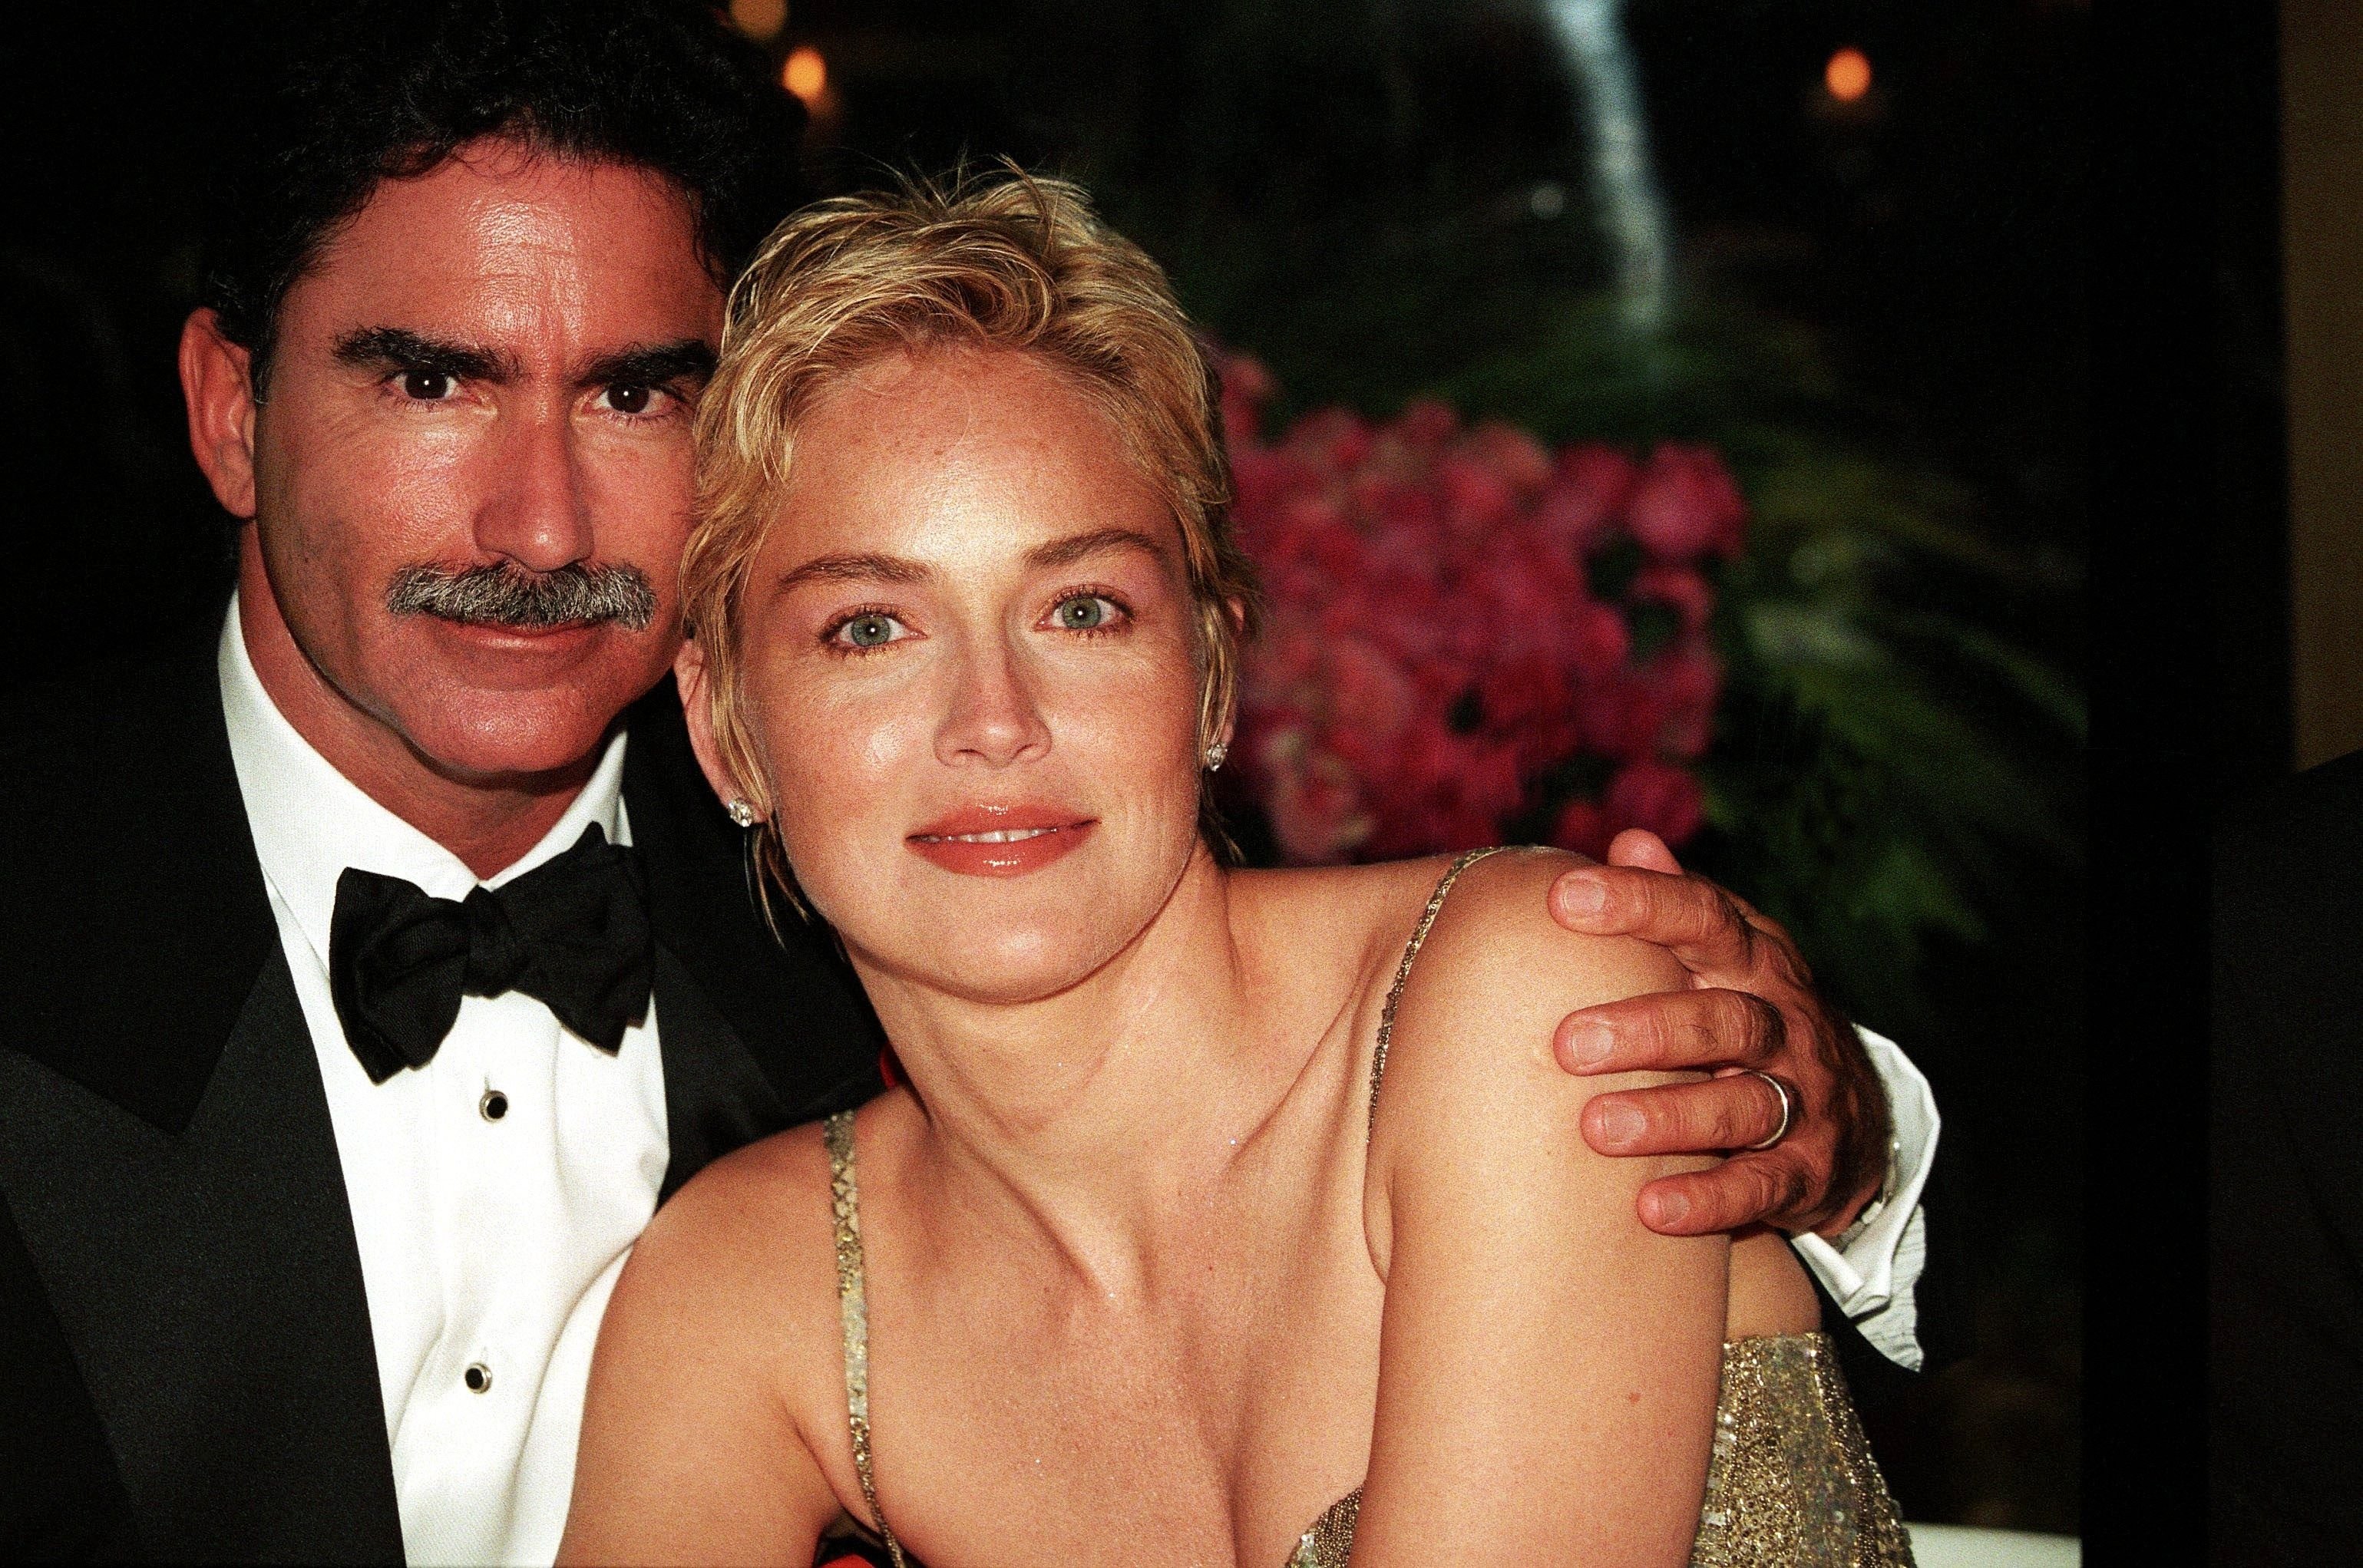 Sharon Stone with Phil Bronstein in 1998 in France | Source: Getty Images